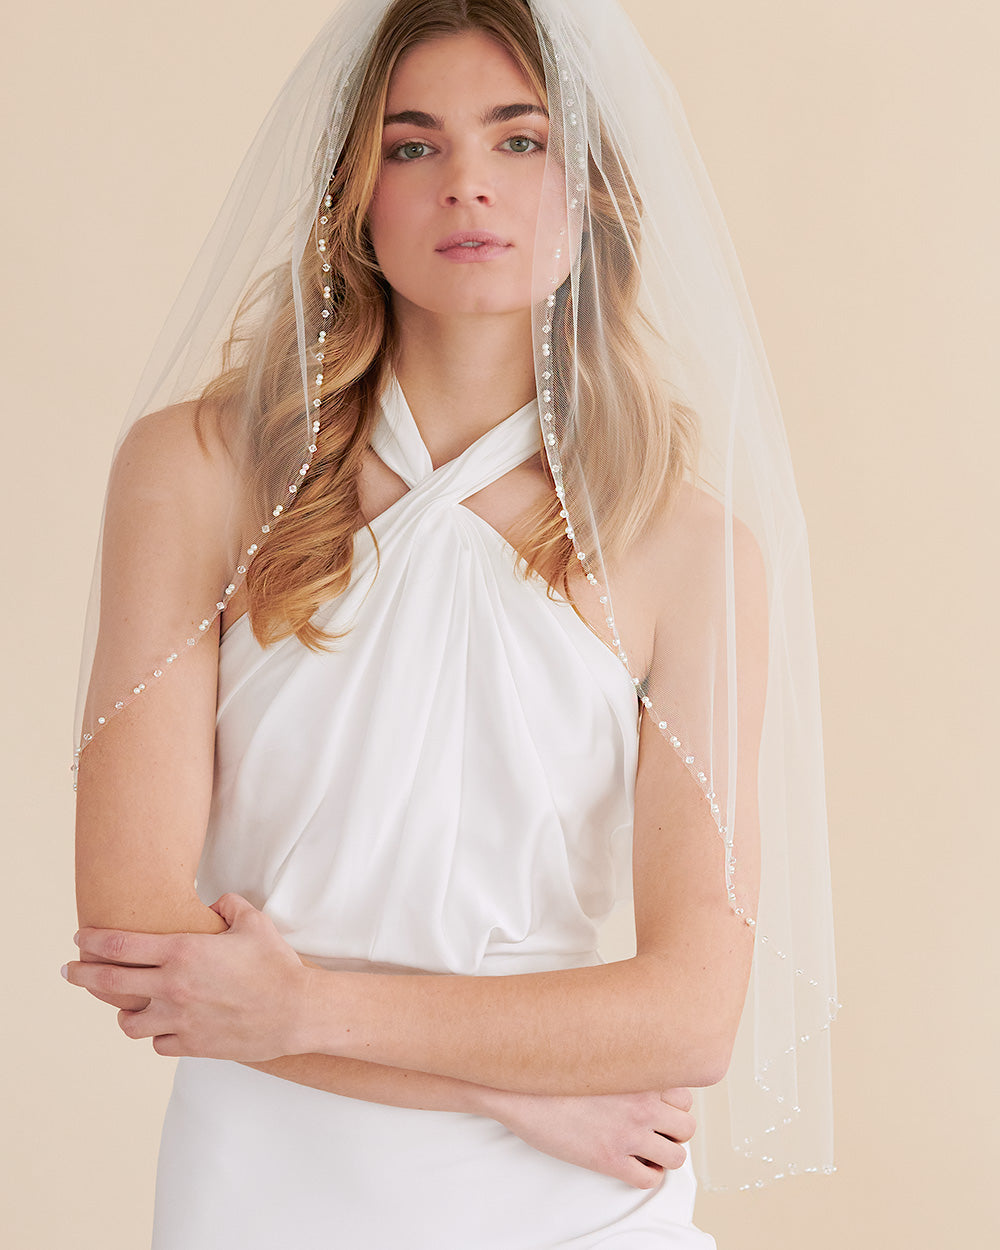 Claire Pearl Wedding Veil